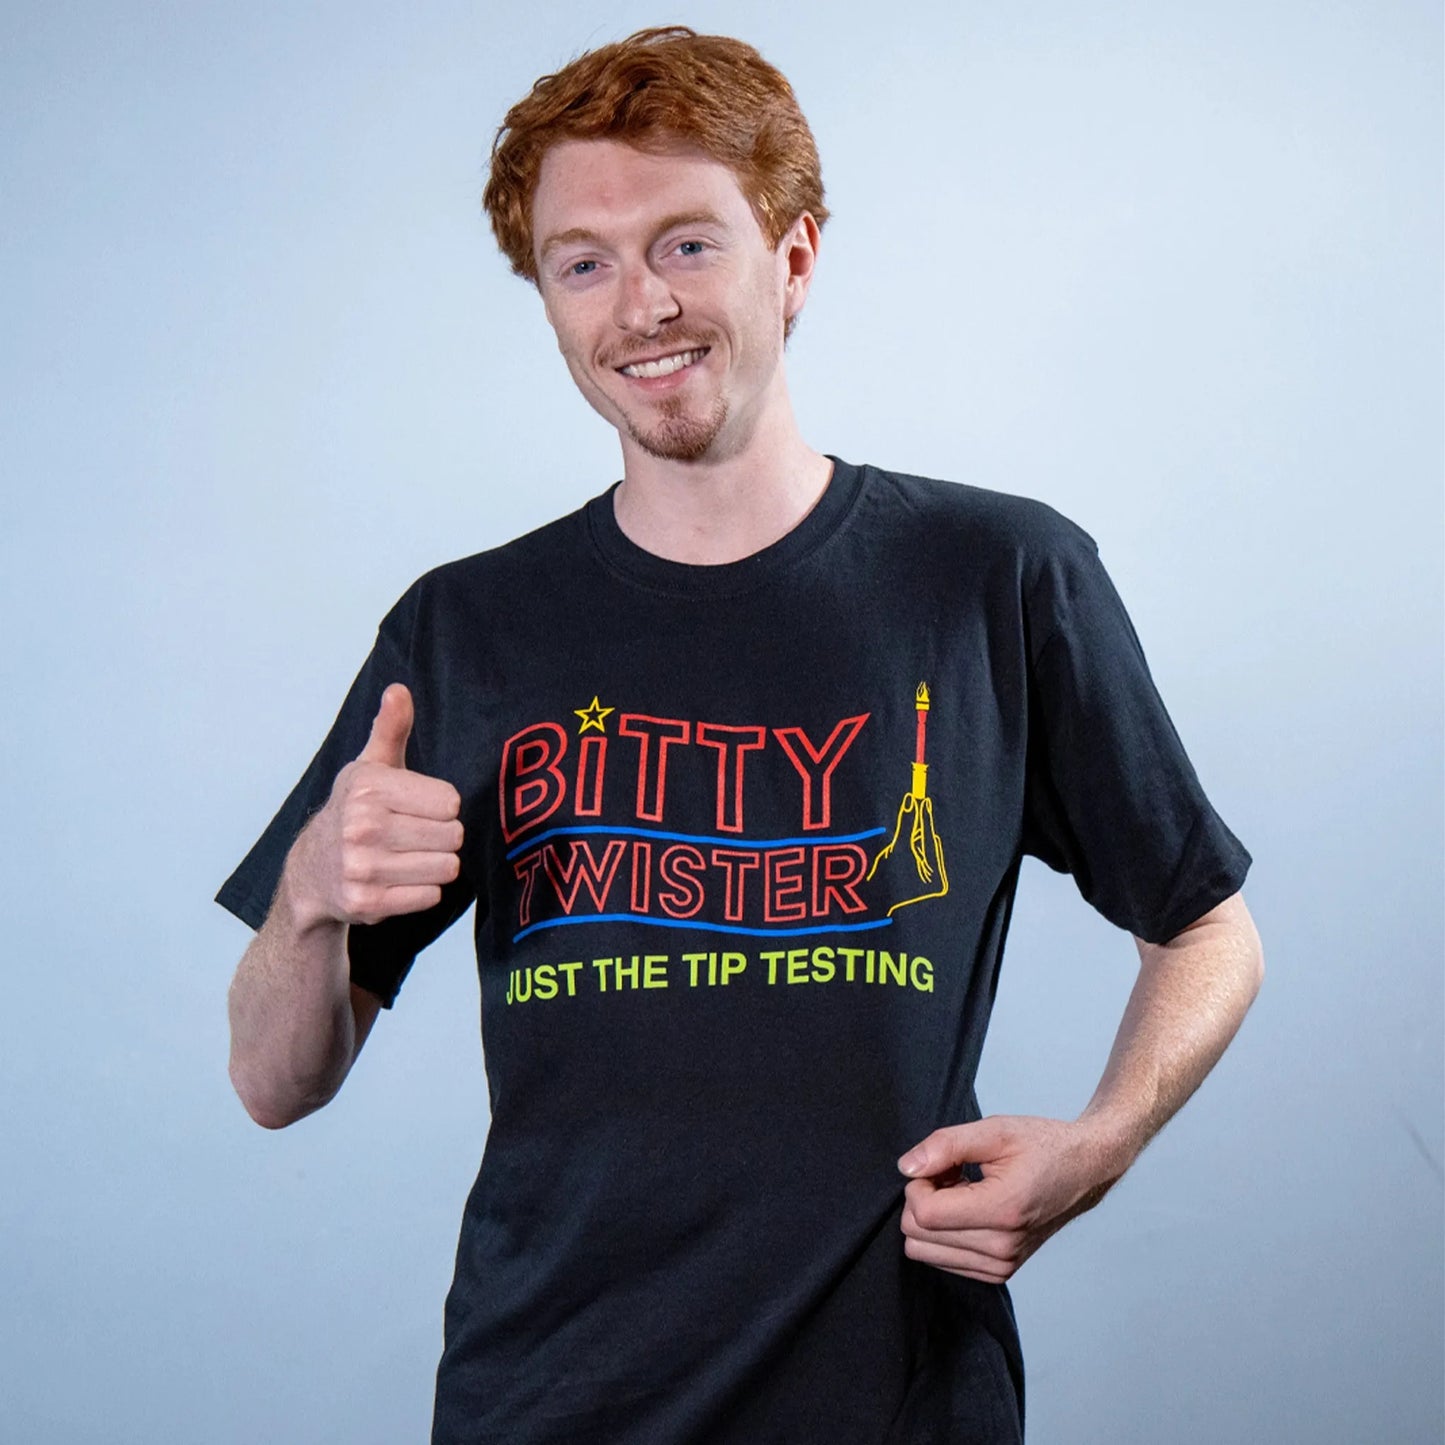 Introducing the Bitty Twister T-shirt, a perfect blend of style and humor. Embrace the playful spirit with the 'JUST THE TIP' Driver bit TESTING design, making a statement that's sure to spark conversations. Crafted for comfort and featuring a touch of wit, this tee is a must-have for those who appreciate a good laugh and quality apparel